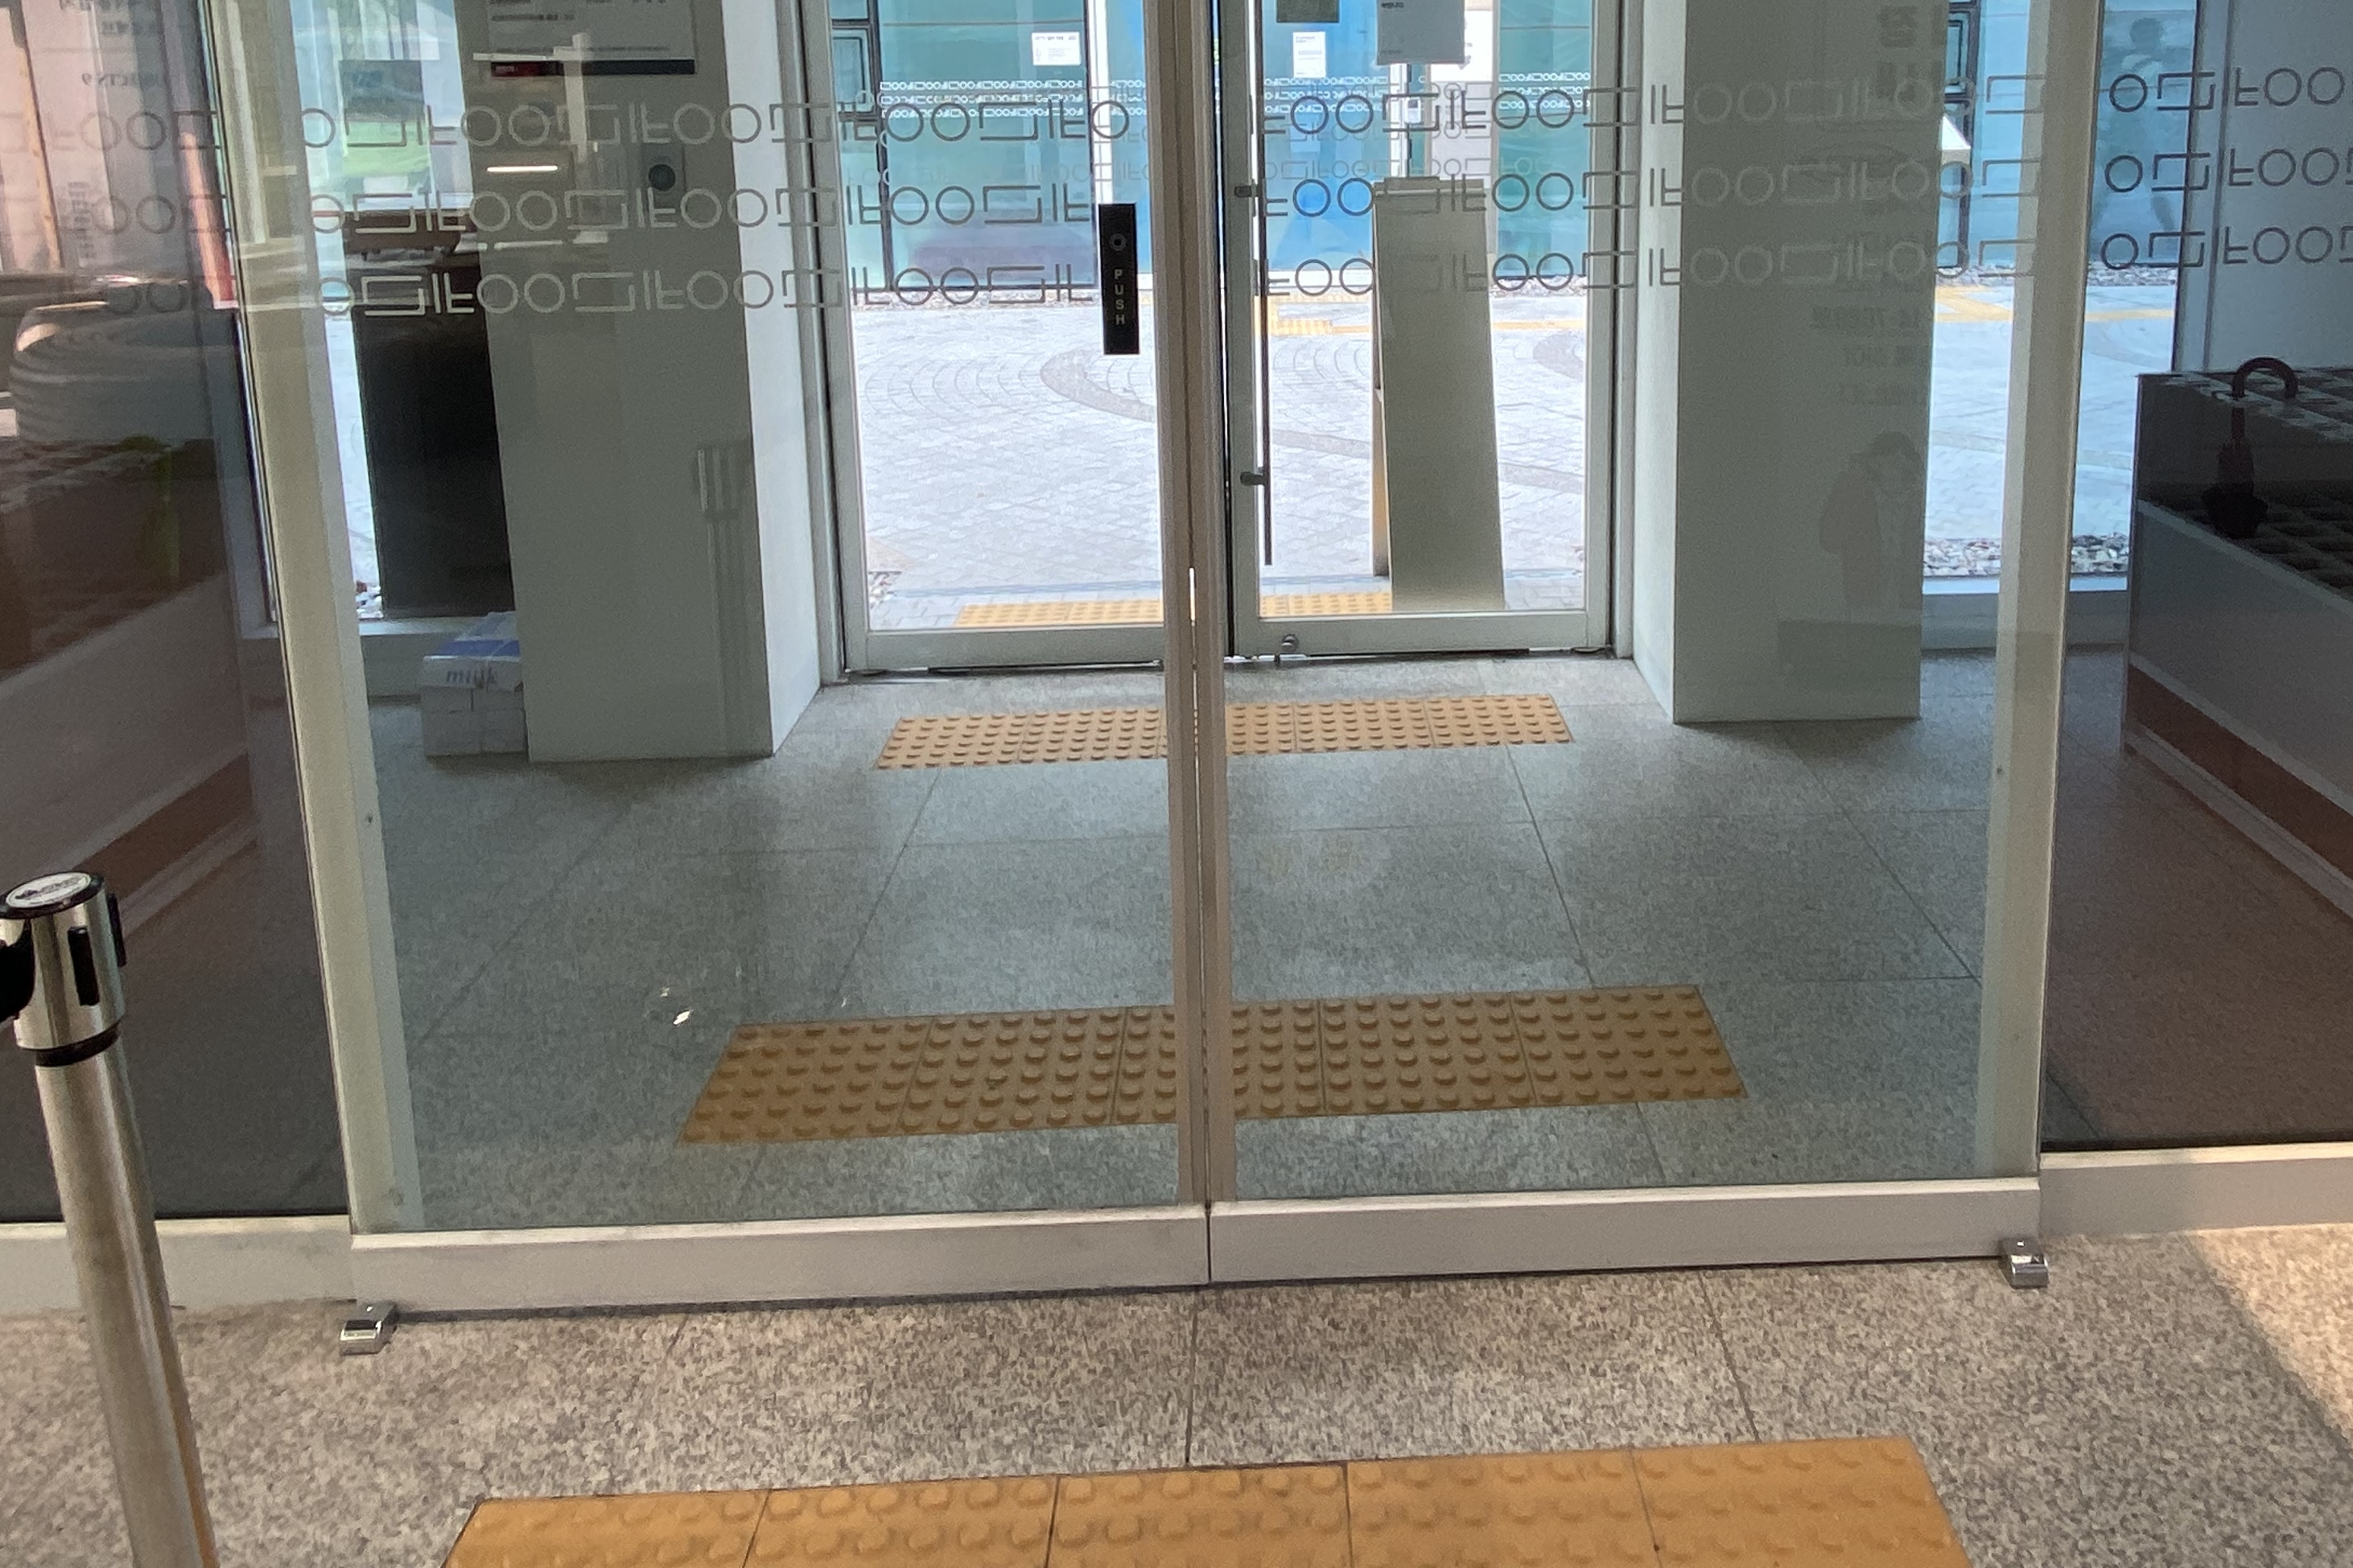 Entryway/ Main entrance0 : automatic door in glass inside the double entrances